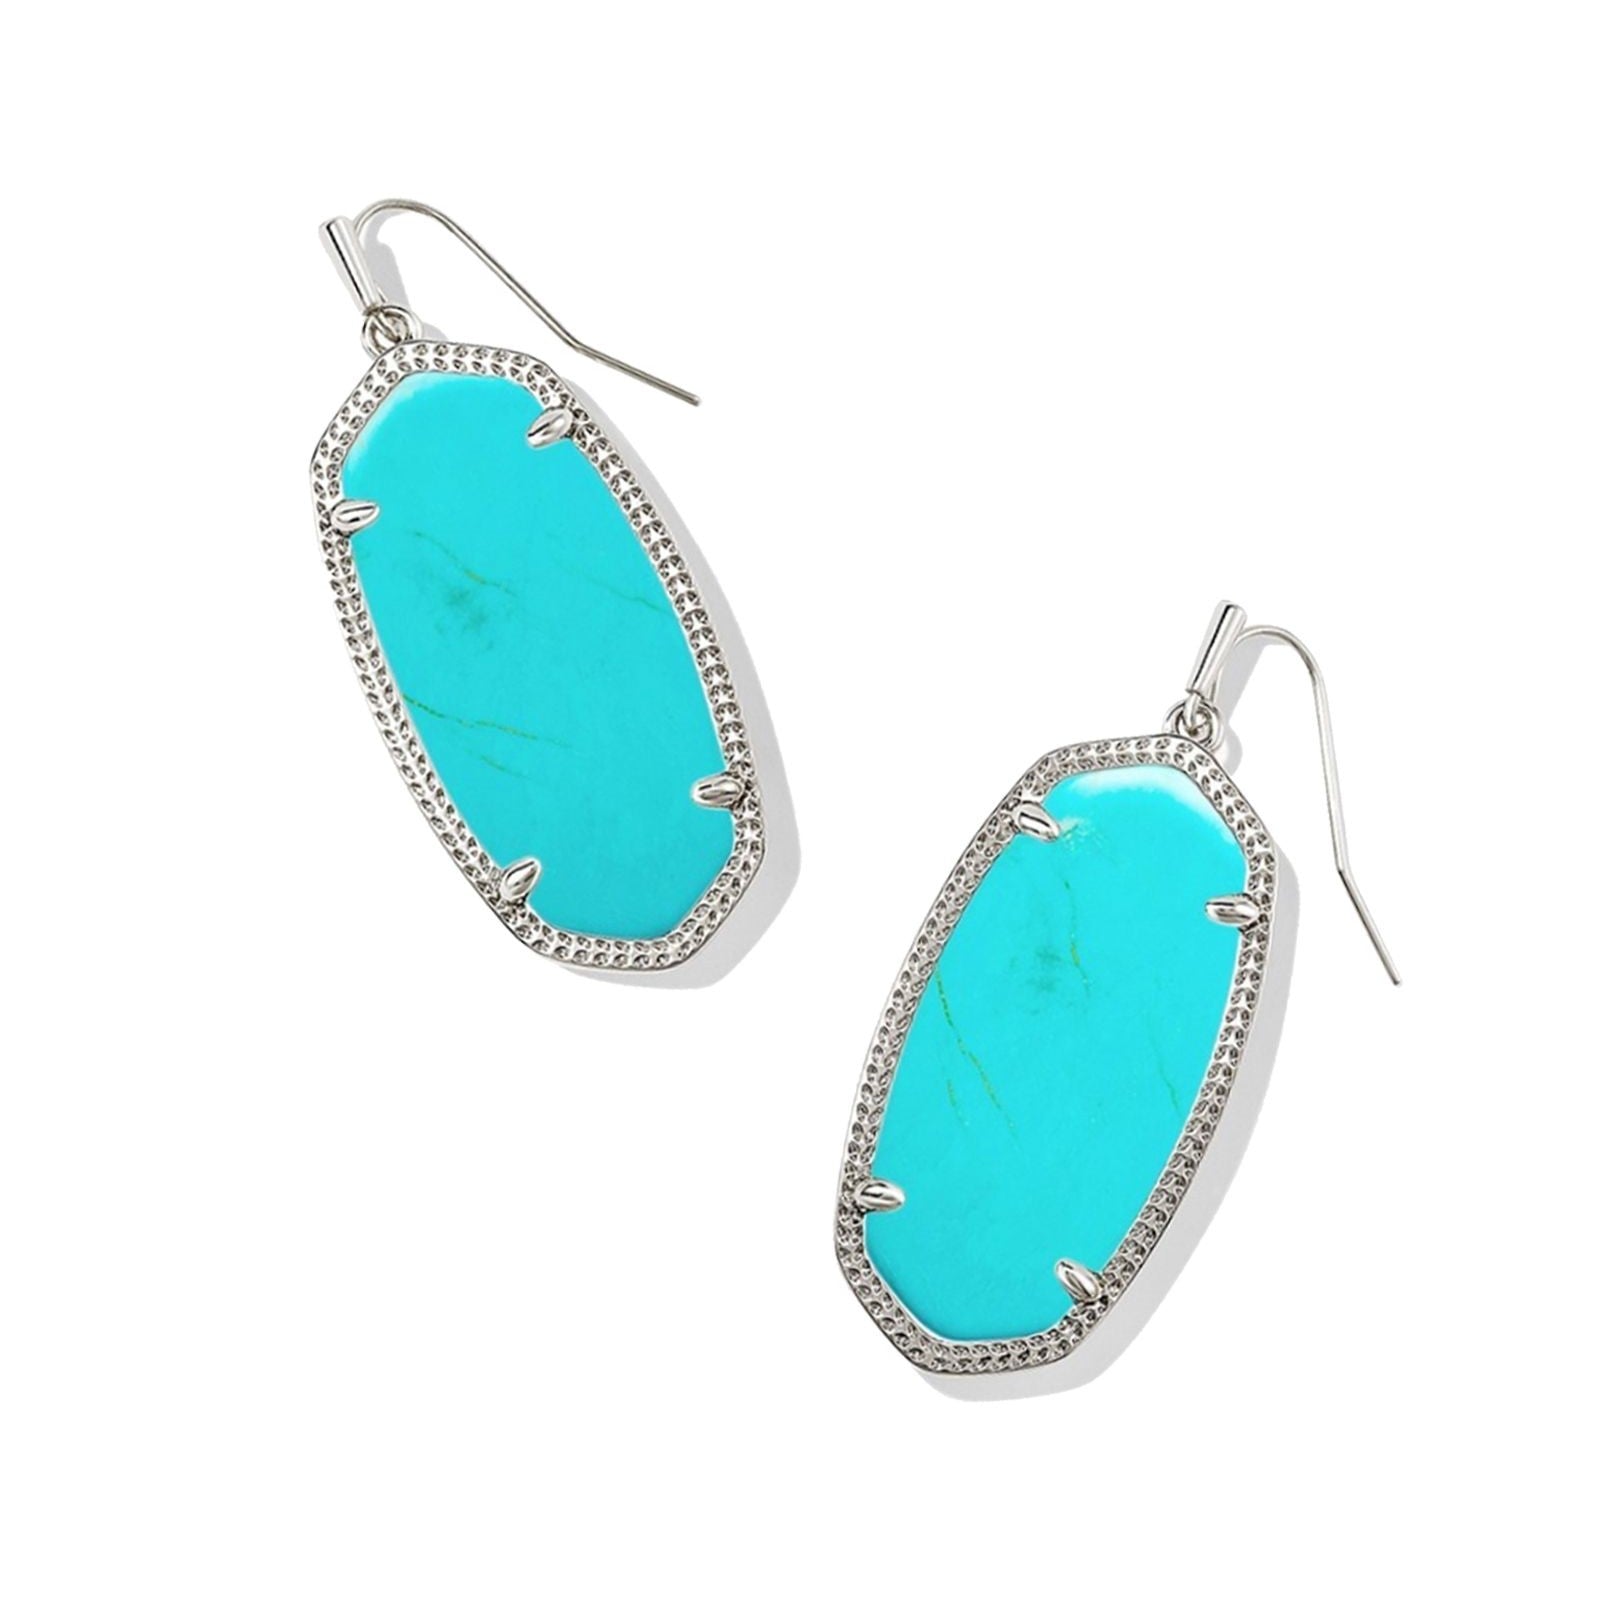 Kendra Scott | Elle Silver Drop Earrings in Variegated Turquoise Magnesite - Giddy Up Glamour Boutique